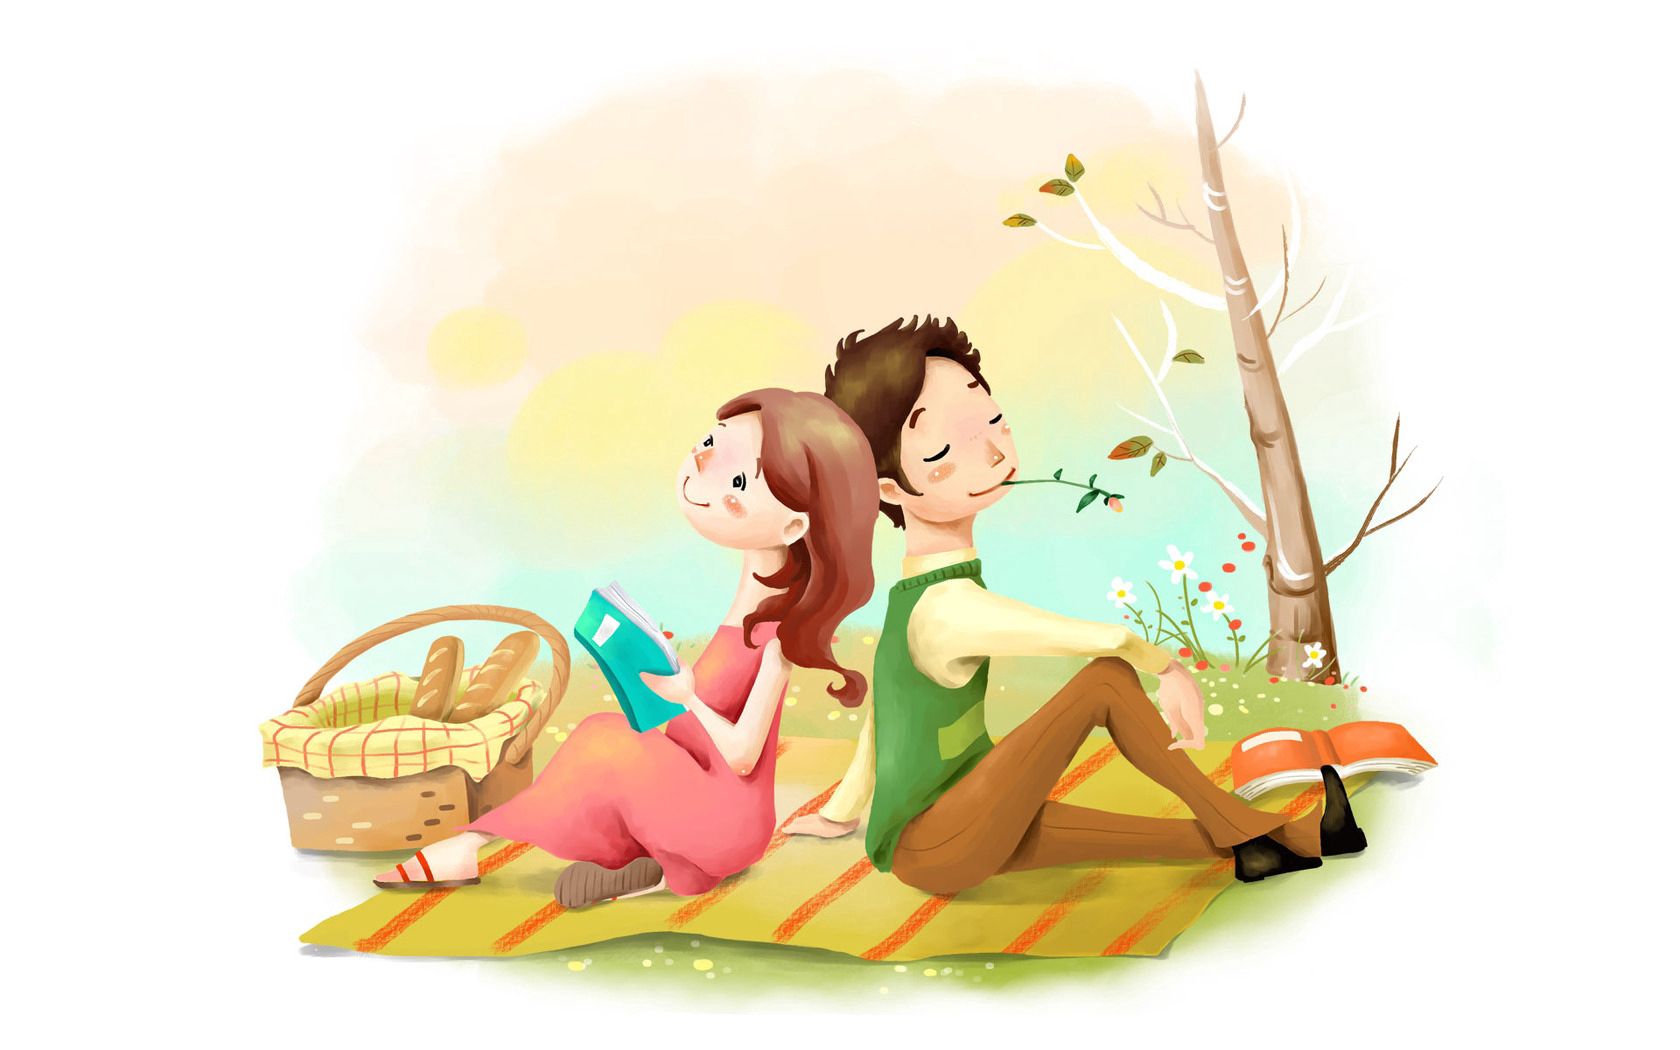 guy, love, drawing, girl, flowers, picture, basket, lawn, positive, bread, picnic, reverie, dreaminess HD wallpaper